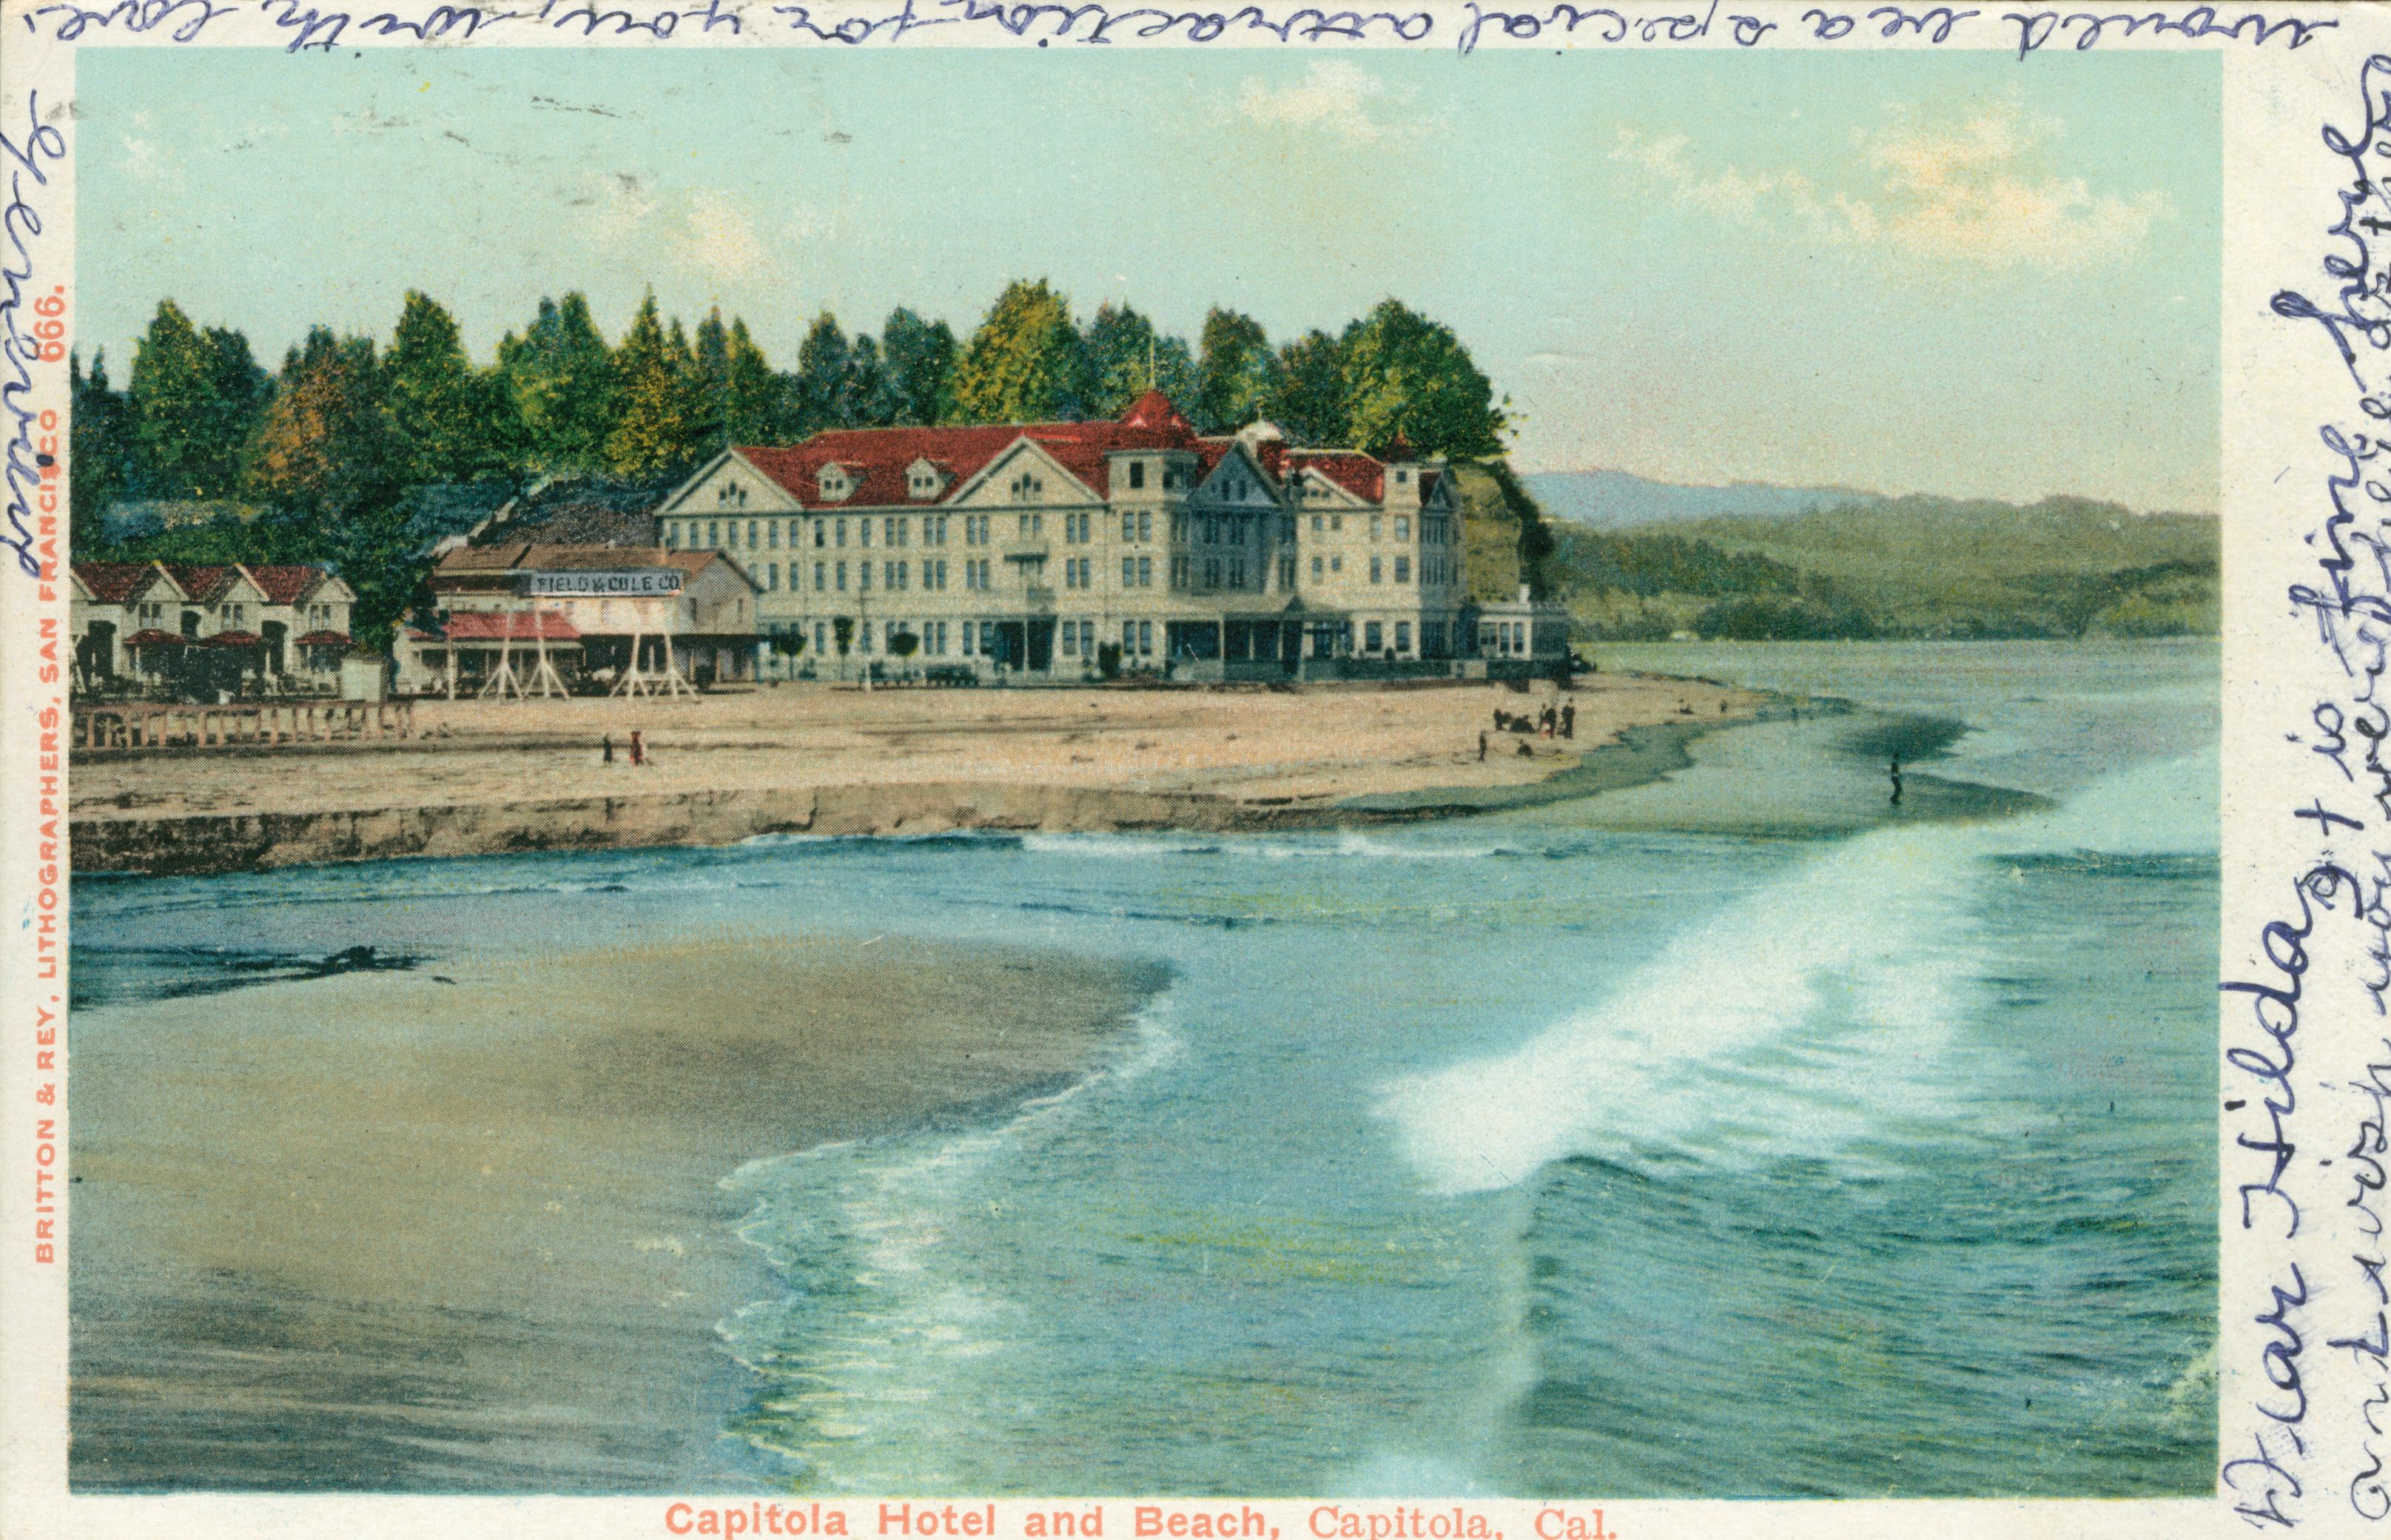 Capitola Hotel on the beach, people walking on the beach, river outlet leading to the river, trees in the background